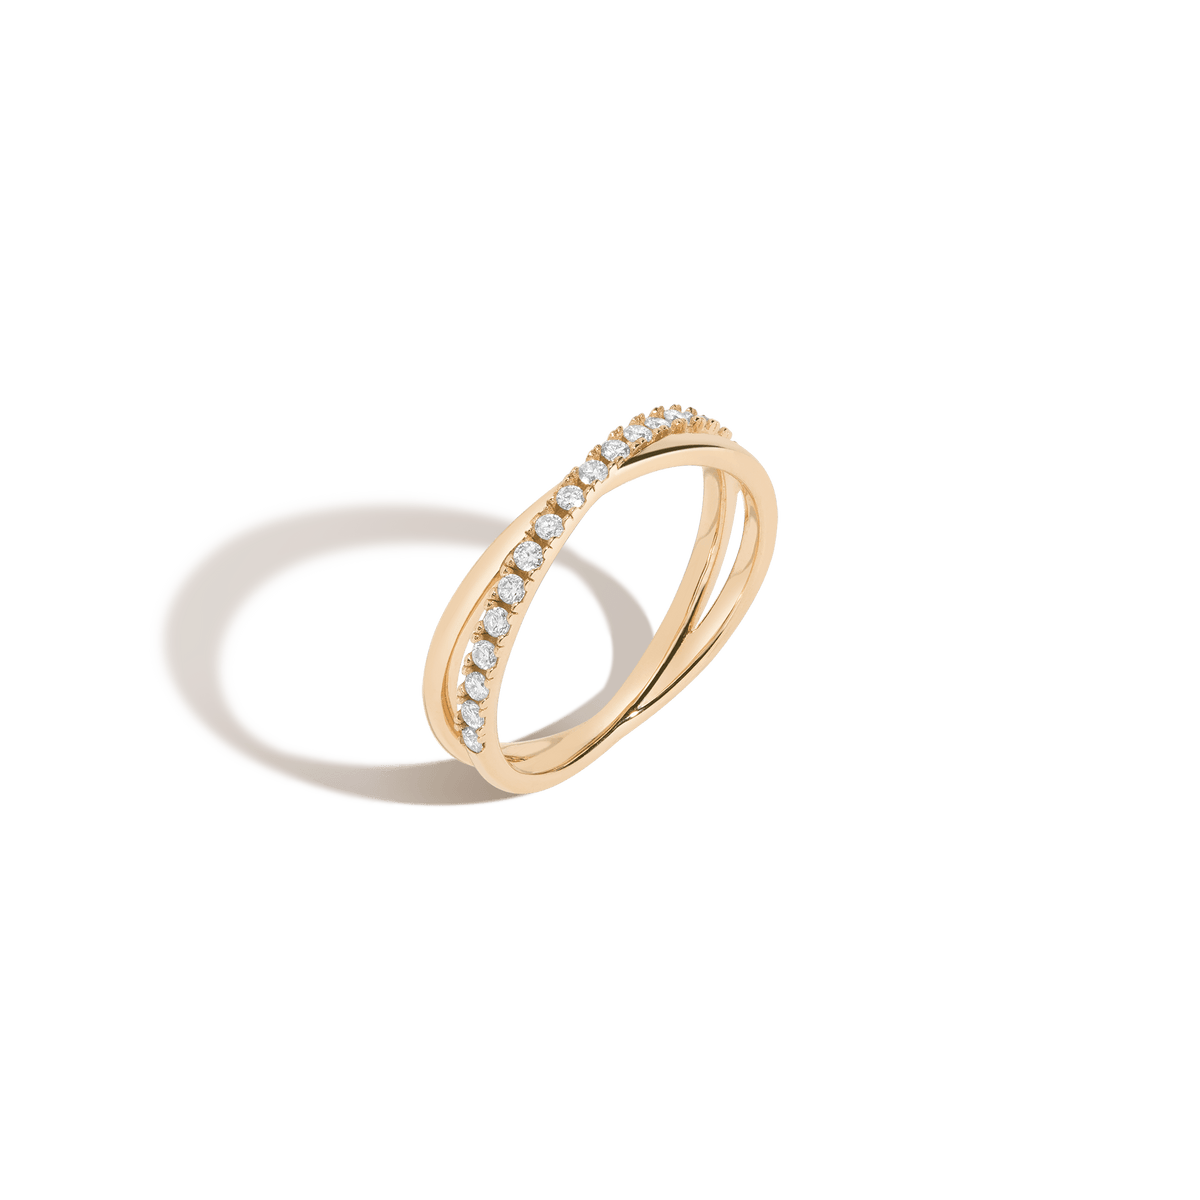 Ring Sizer  Jewelry Wise